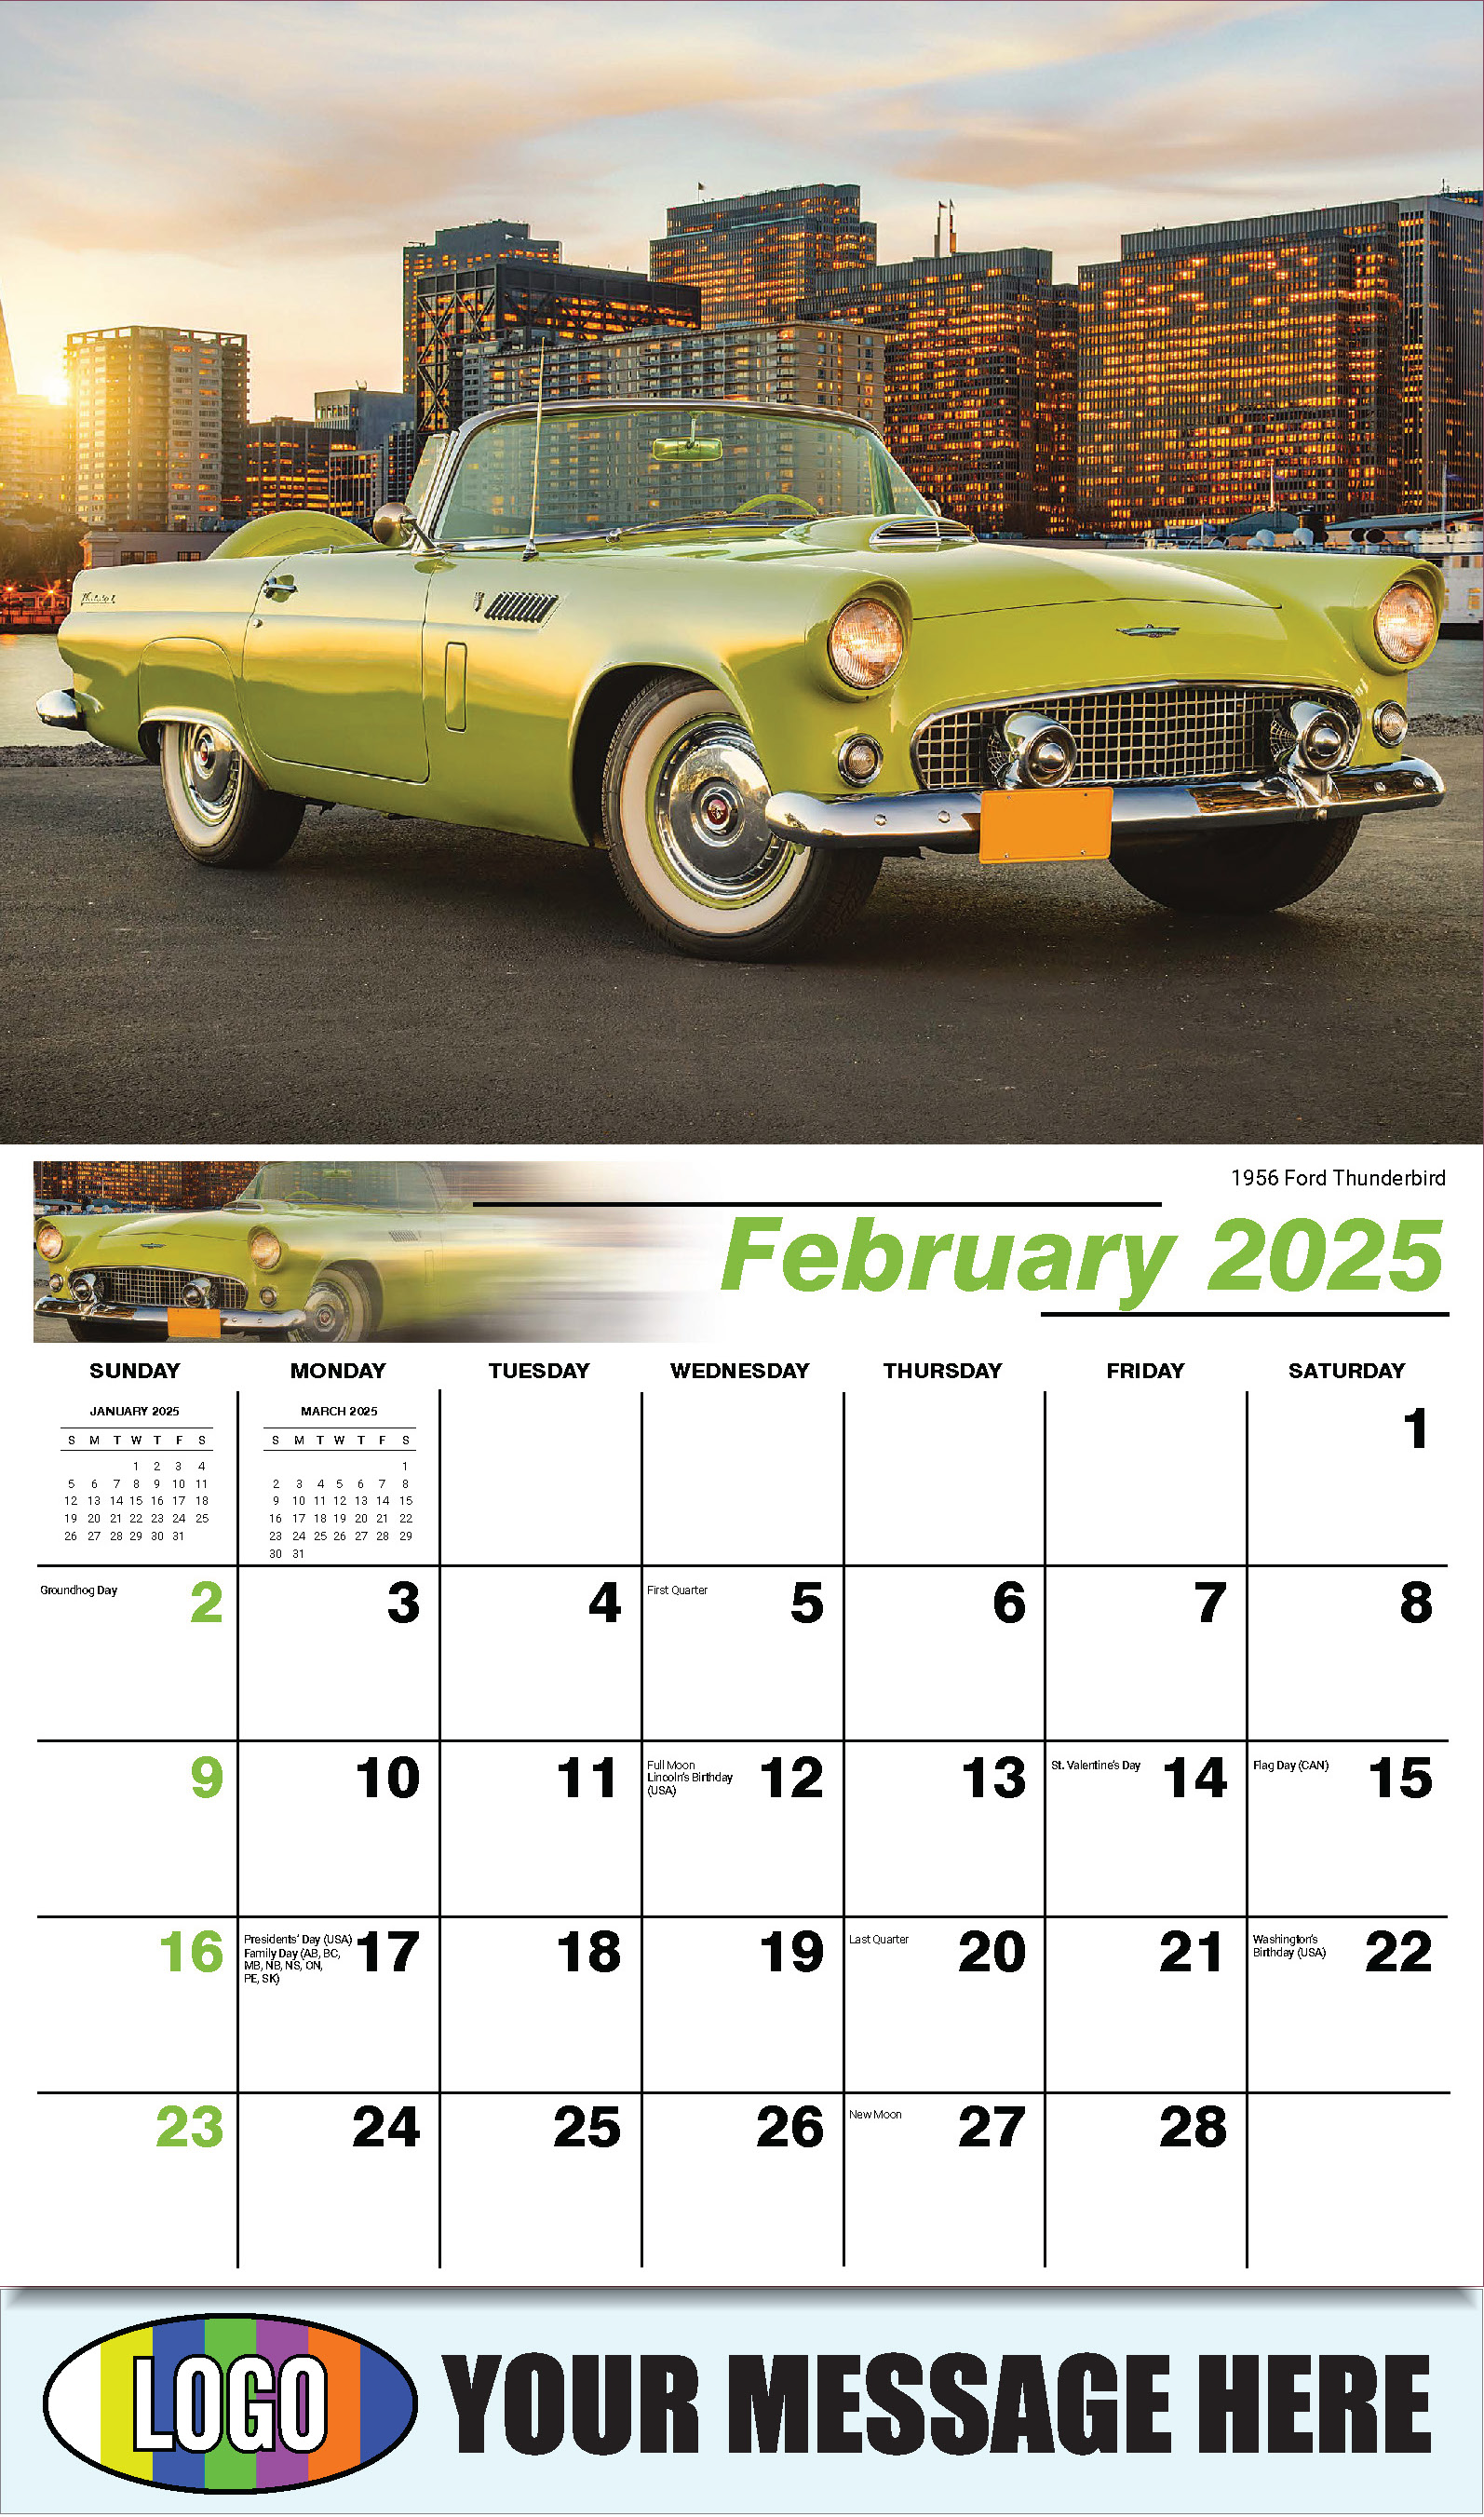 Henry's Heritage FORD Cars 2025 Automotive Business Promo Calendar - February